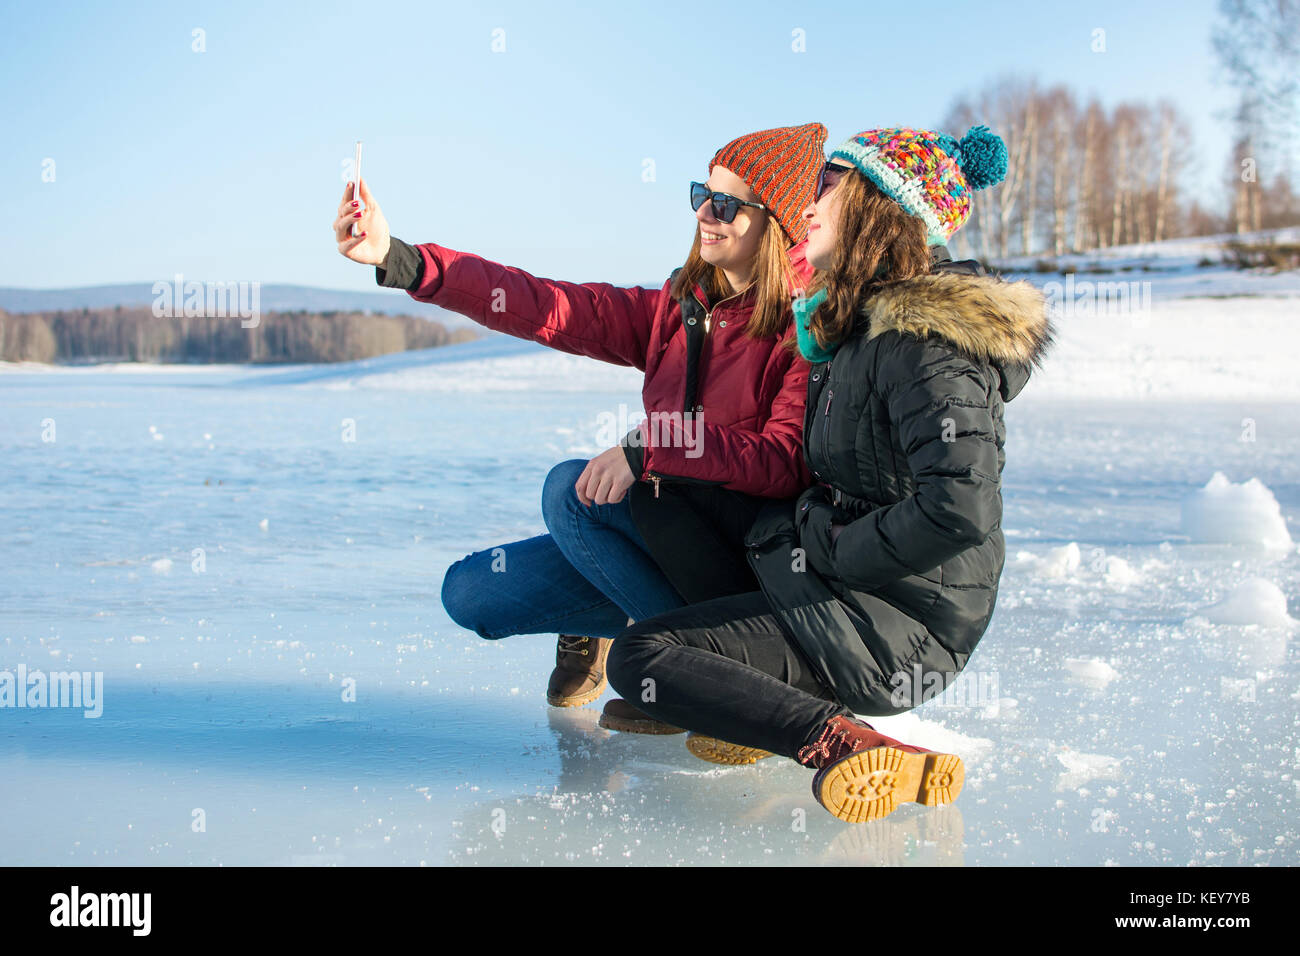 Girl taking selfie siting on a iced lake Stock Photo